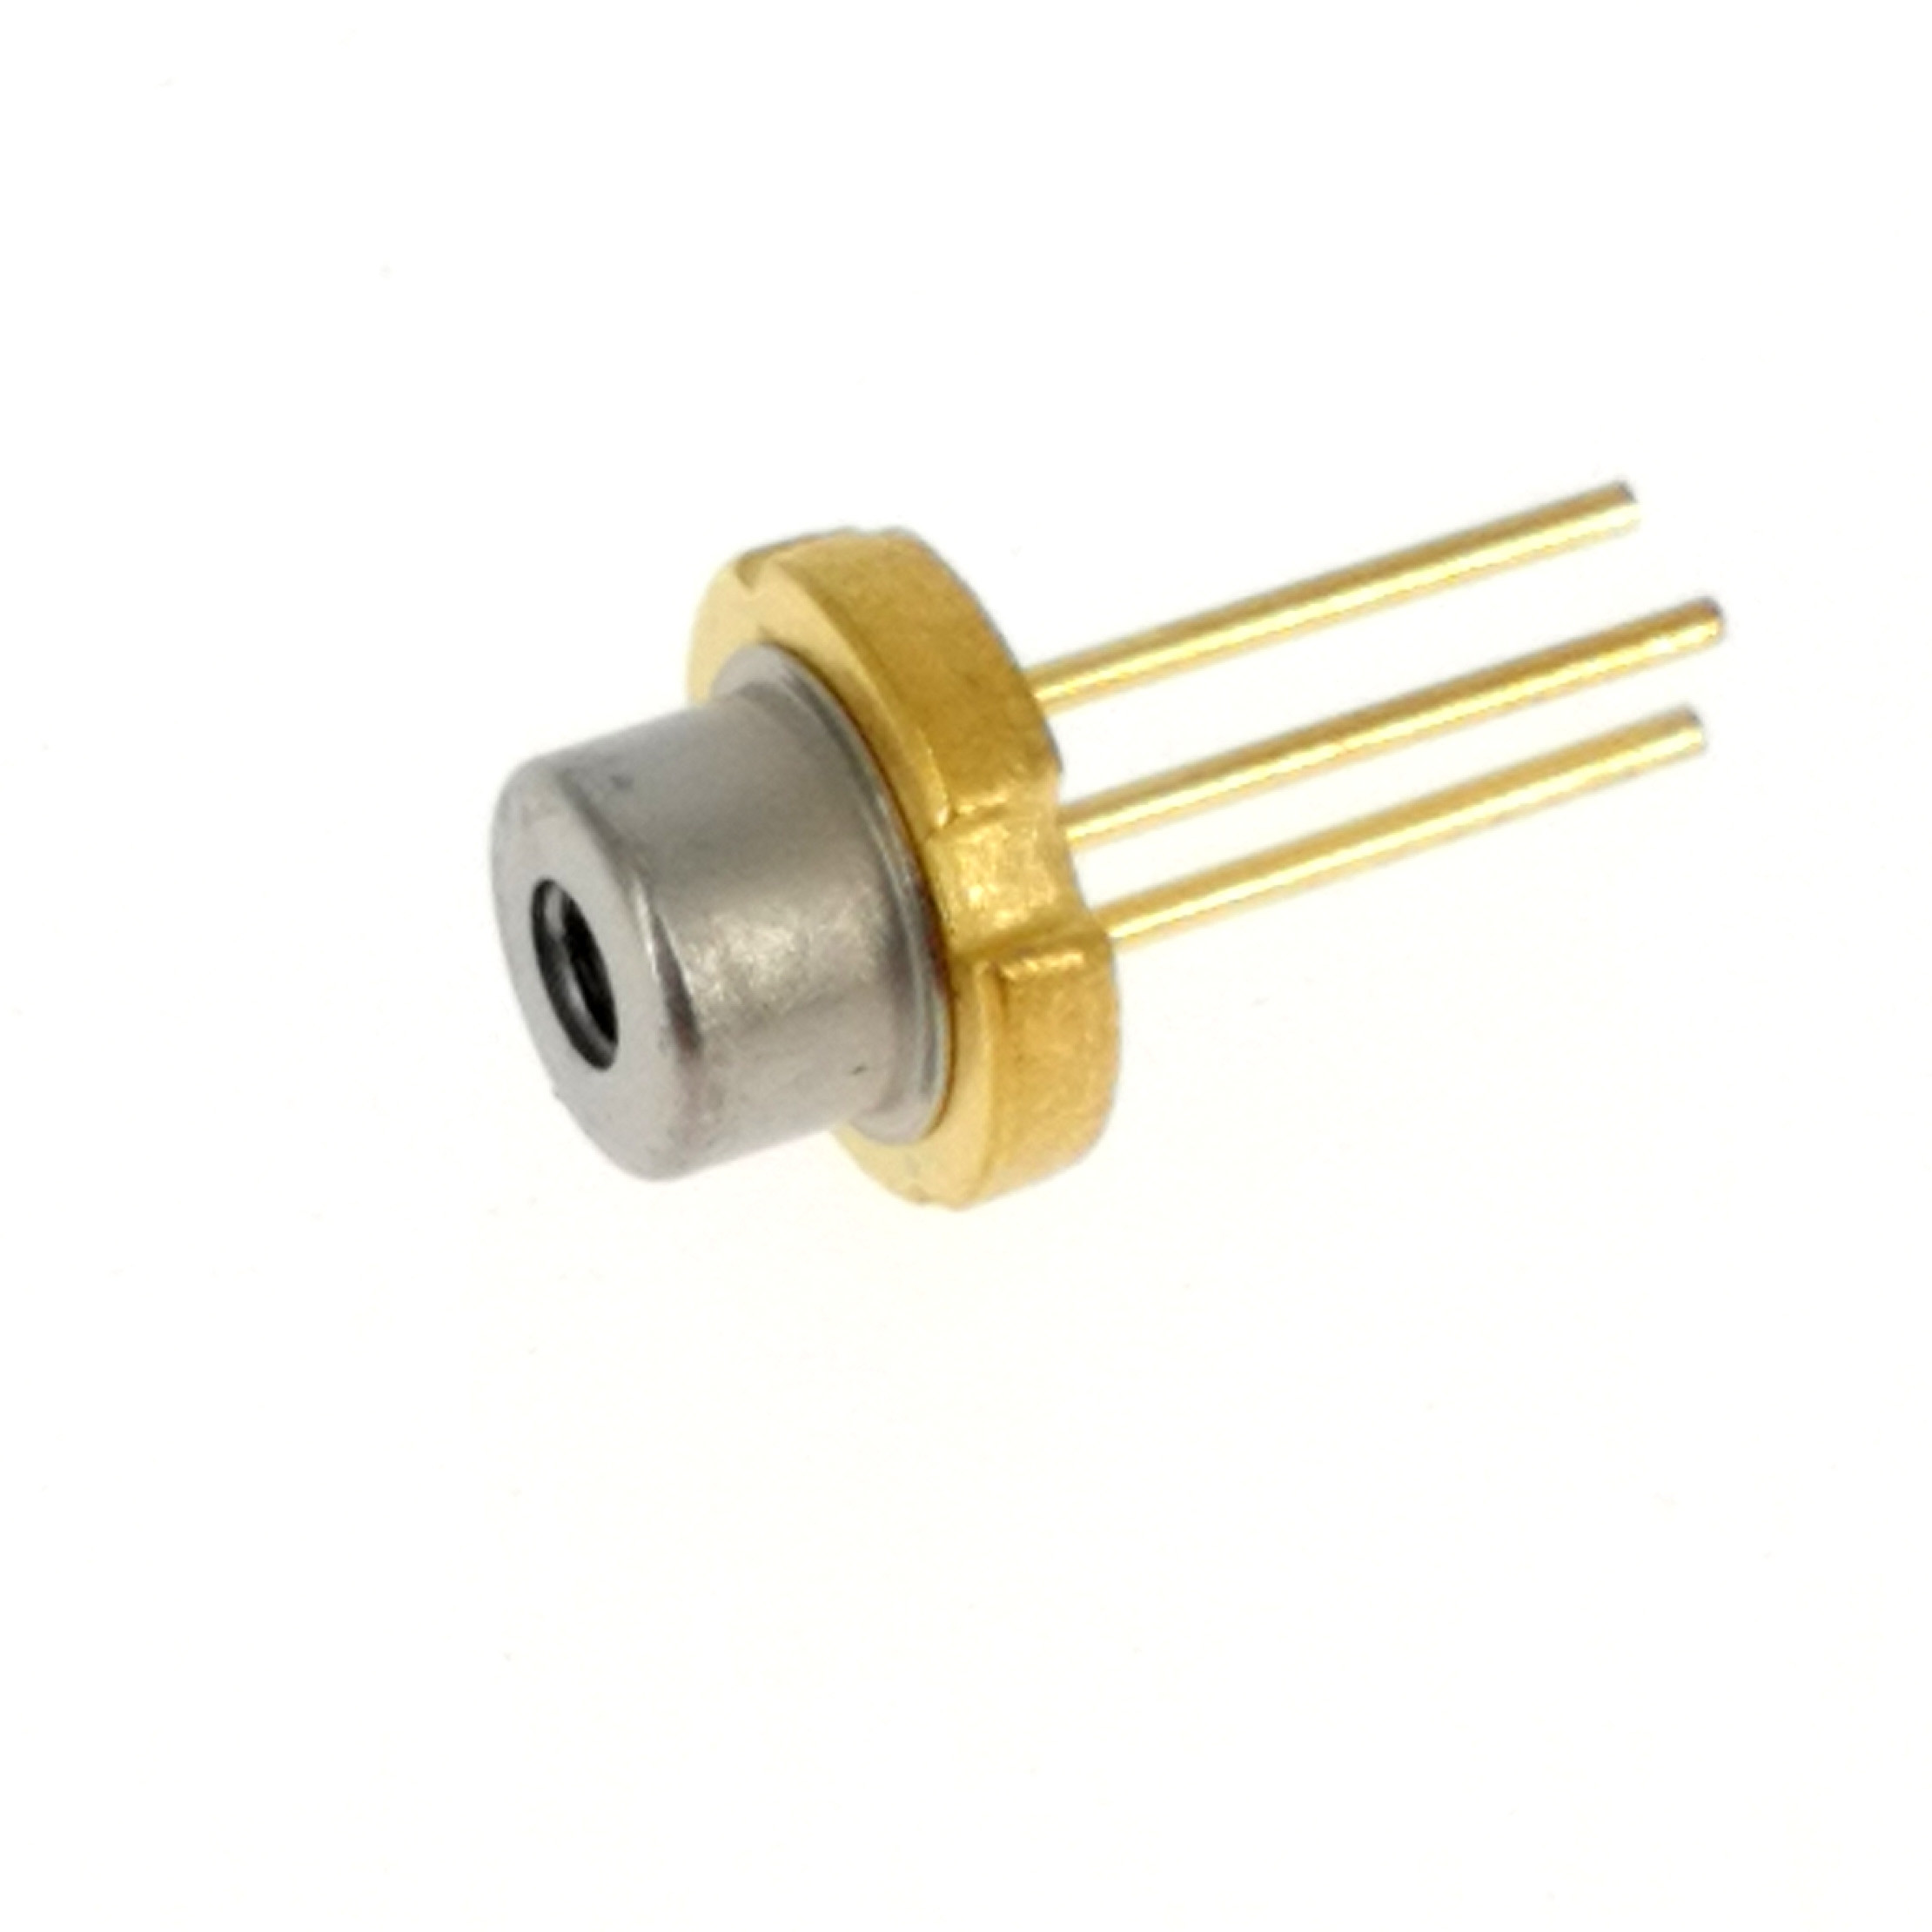 PLT5 516FA 520nm 30mw green laser diode LD